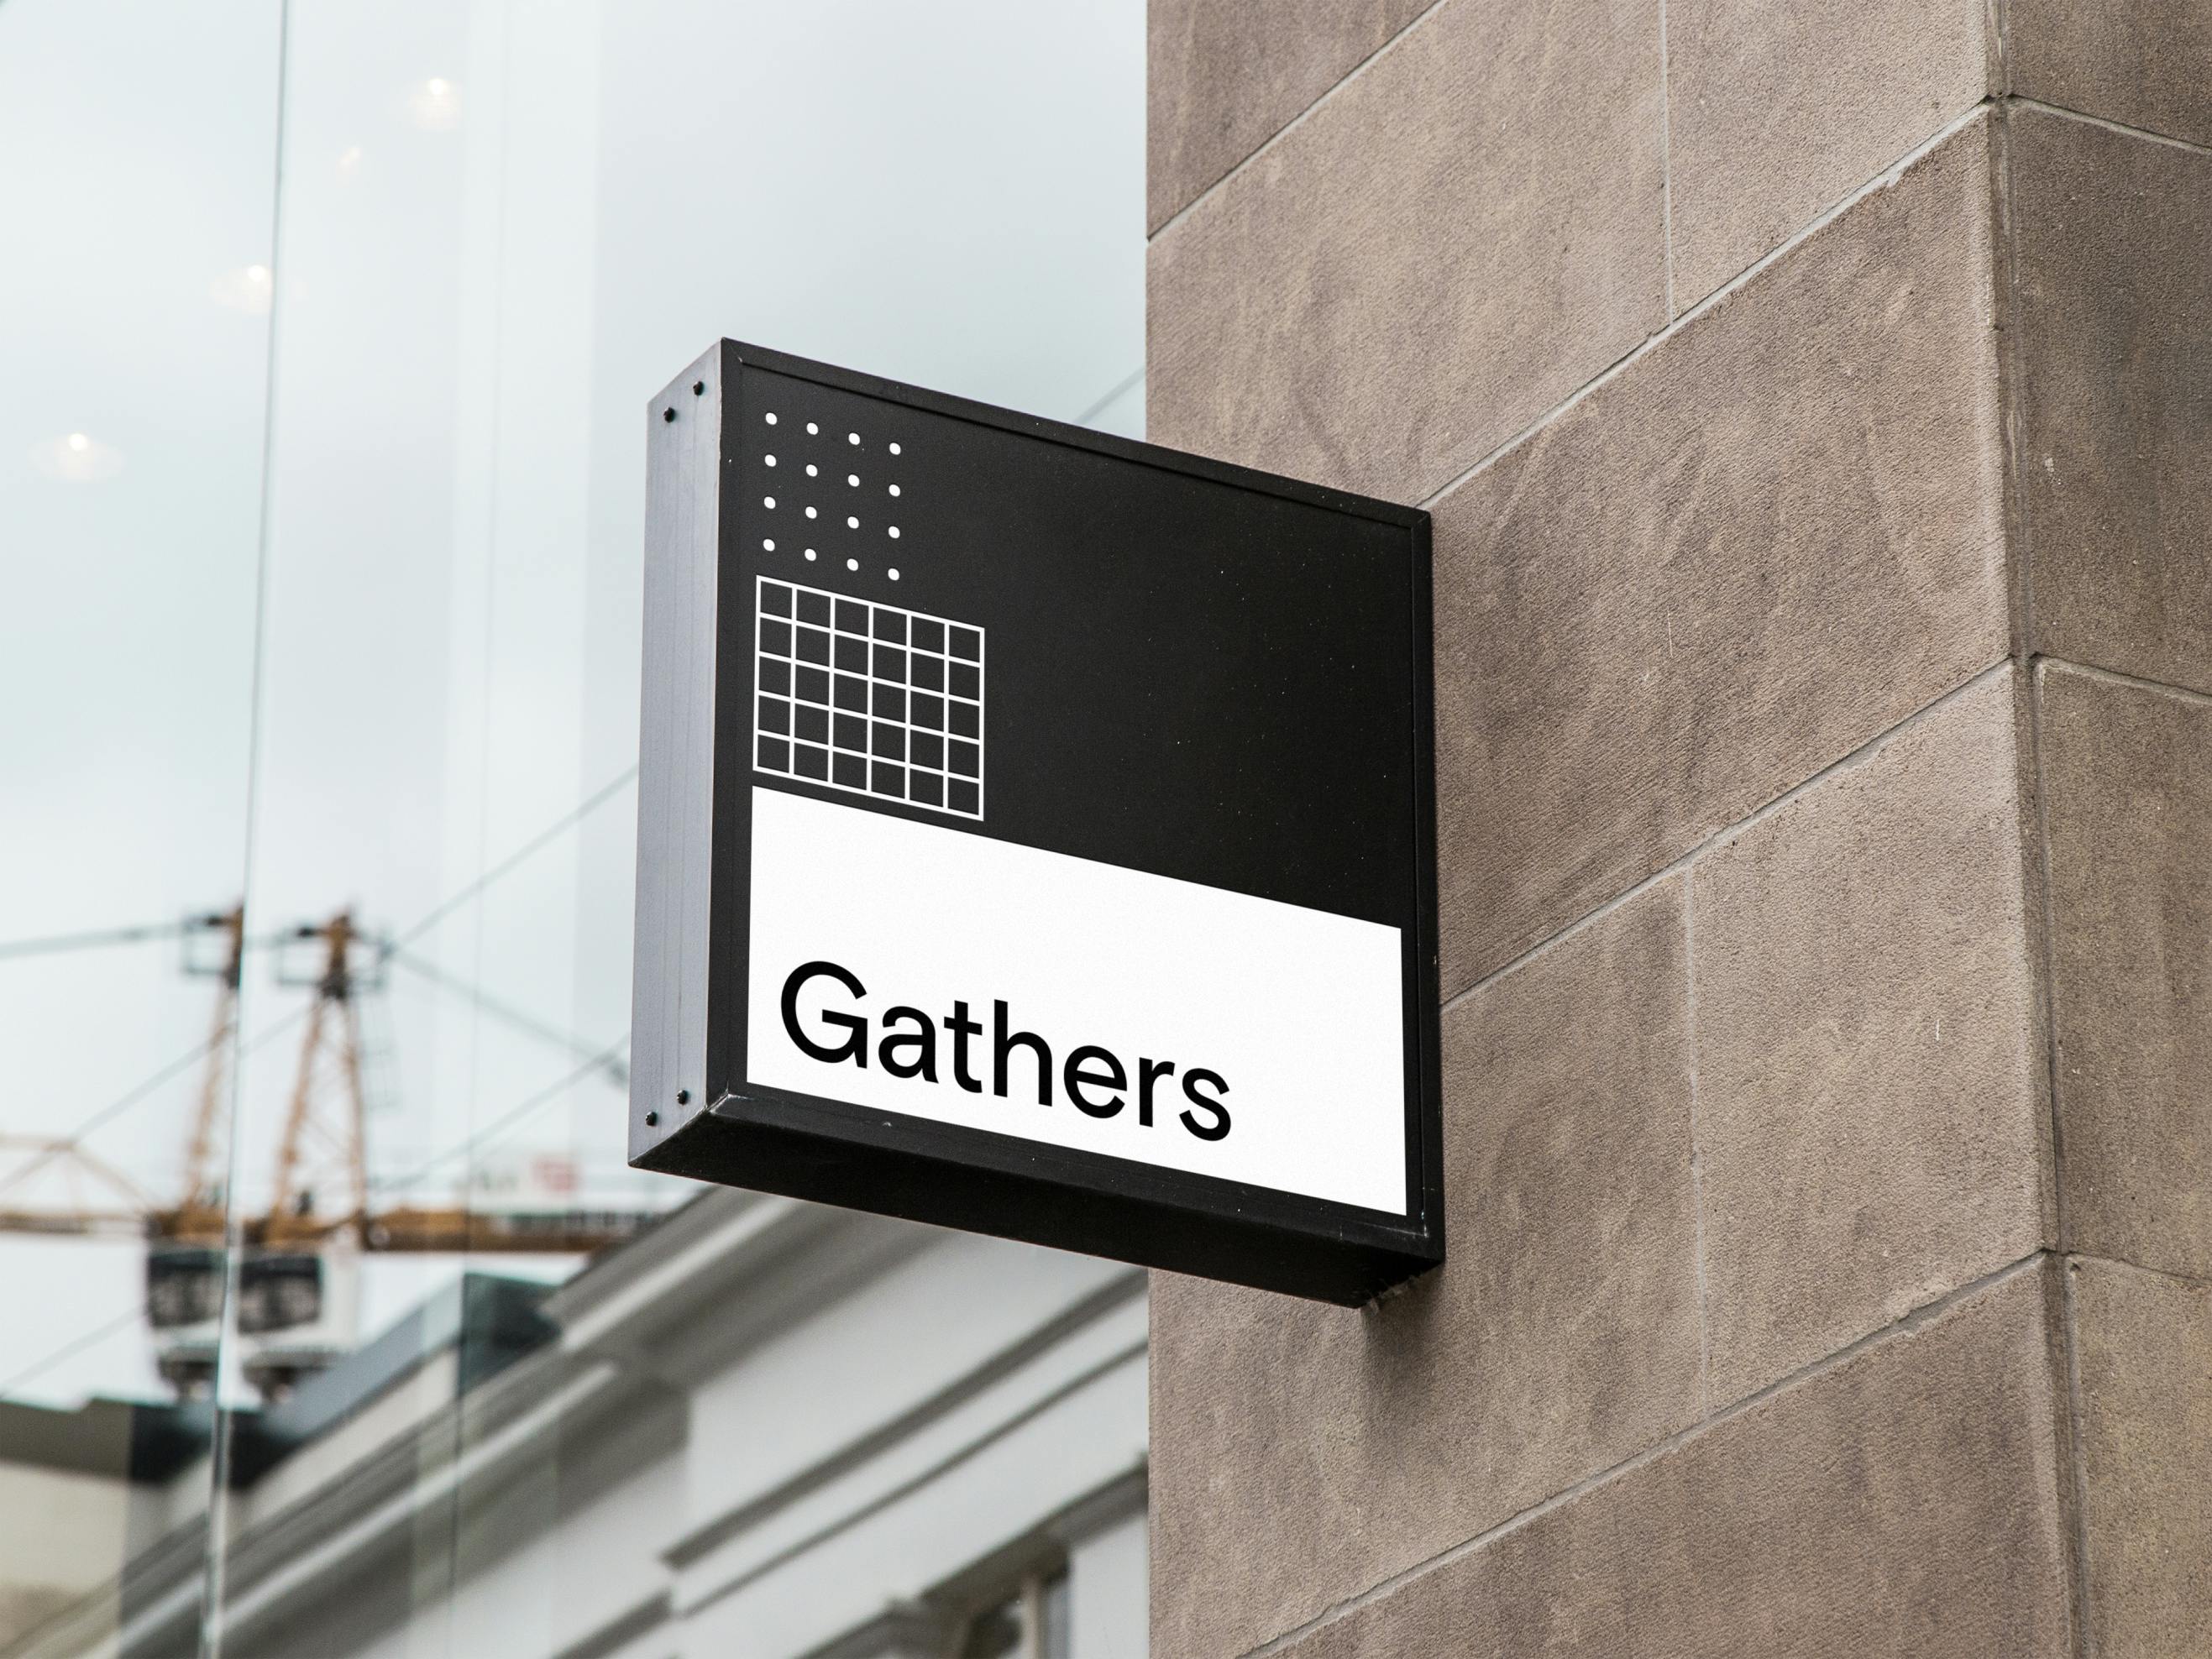 A photo of a restaurant sign labeled "Gathers"